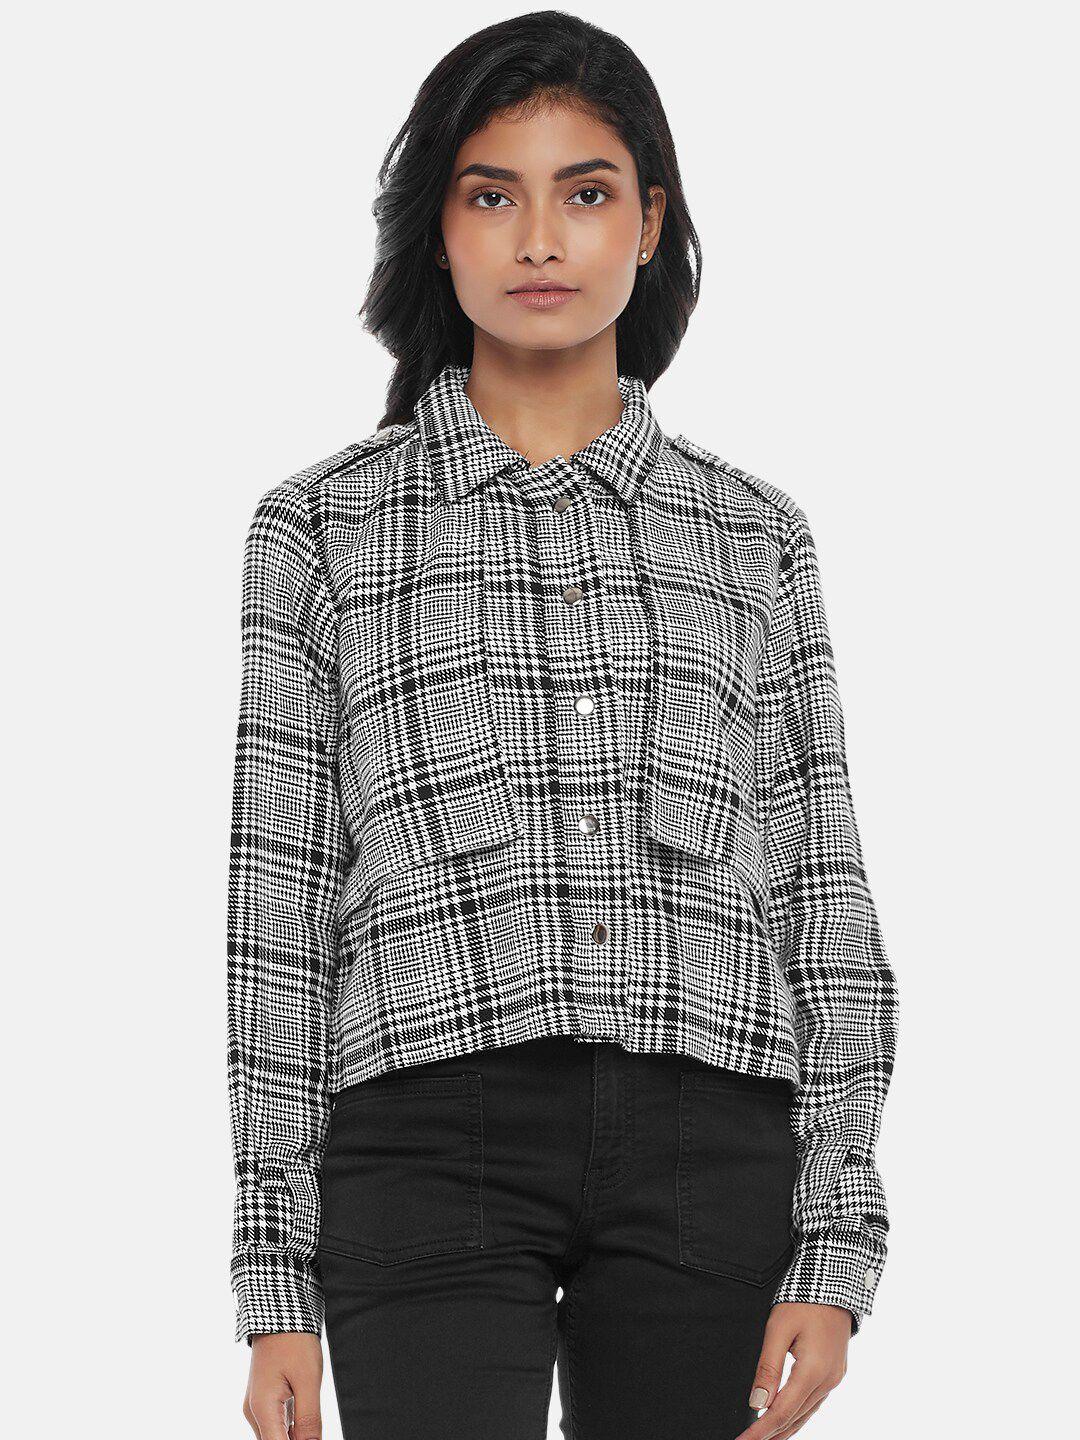 sf-jeans-by-pantaloons-women-white-&-black-checked-crop-casual-shirt